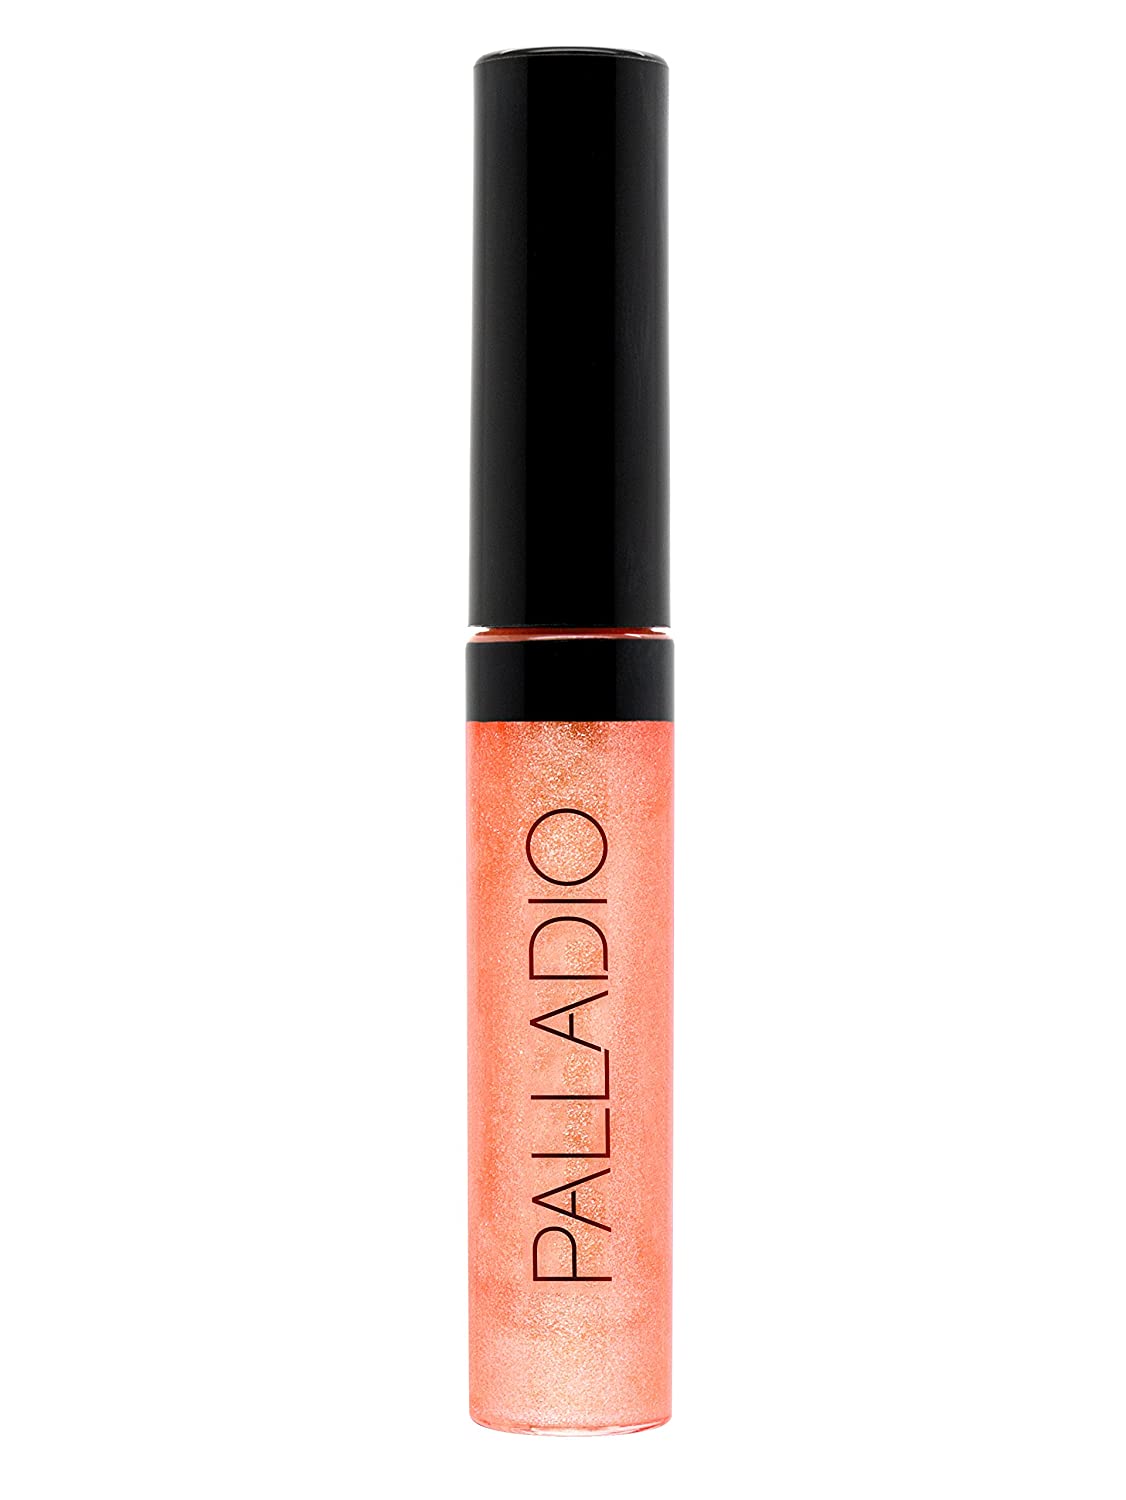 Palladio Lip Gloss, Pink Pearl, Non-Sticky Lip Gloss, Contains Vitamin E and Aloe, Offers Intense Color and Moisturization, Minimizes Lip Wrinkles, Softens Lips with Beautiful Shiny Finish. Cruelty Free.